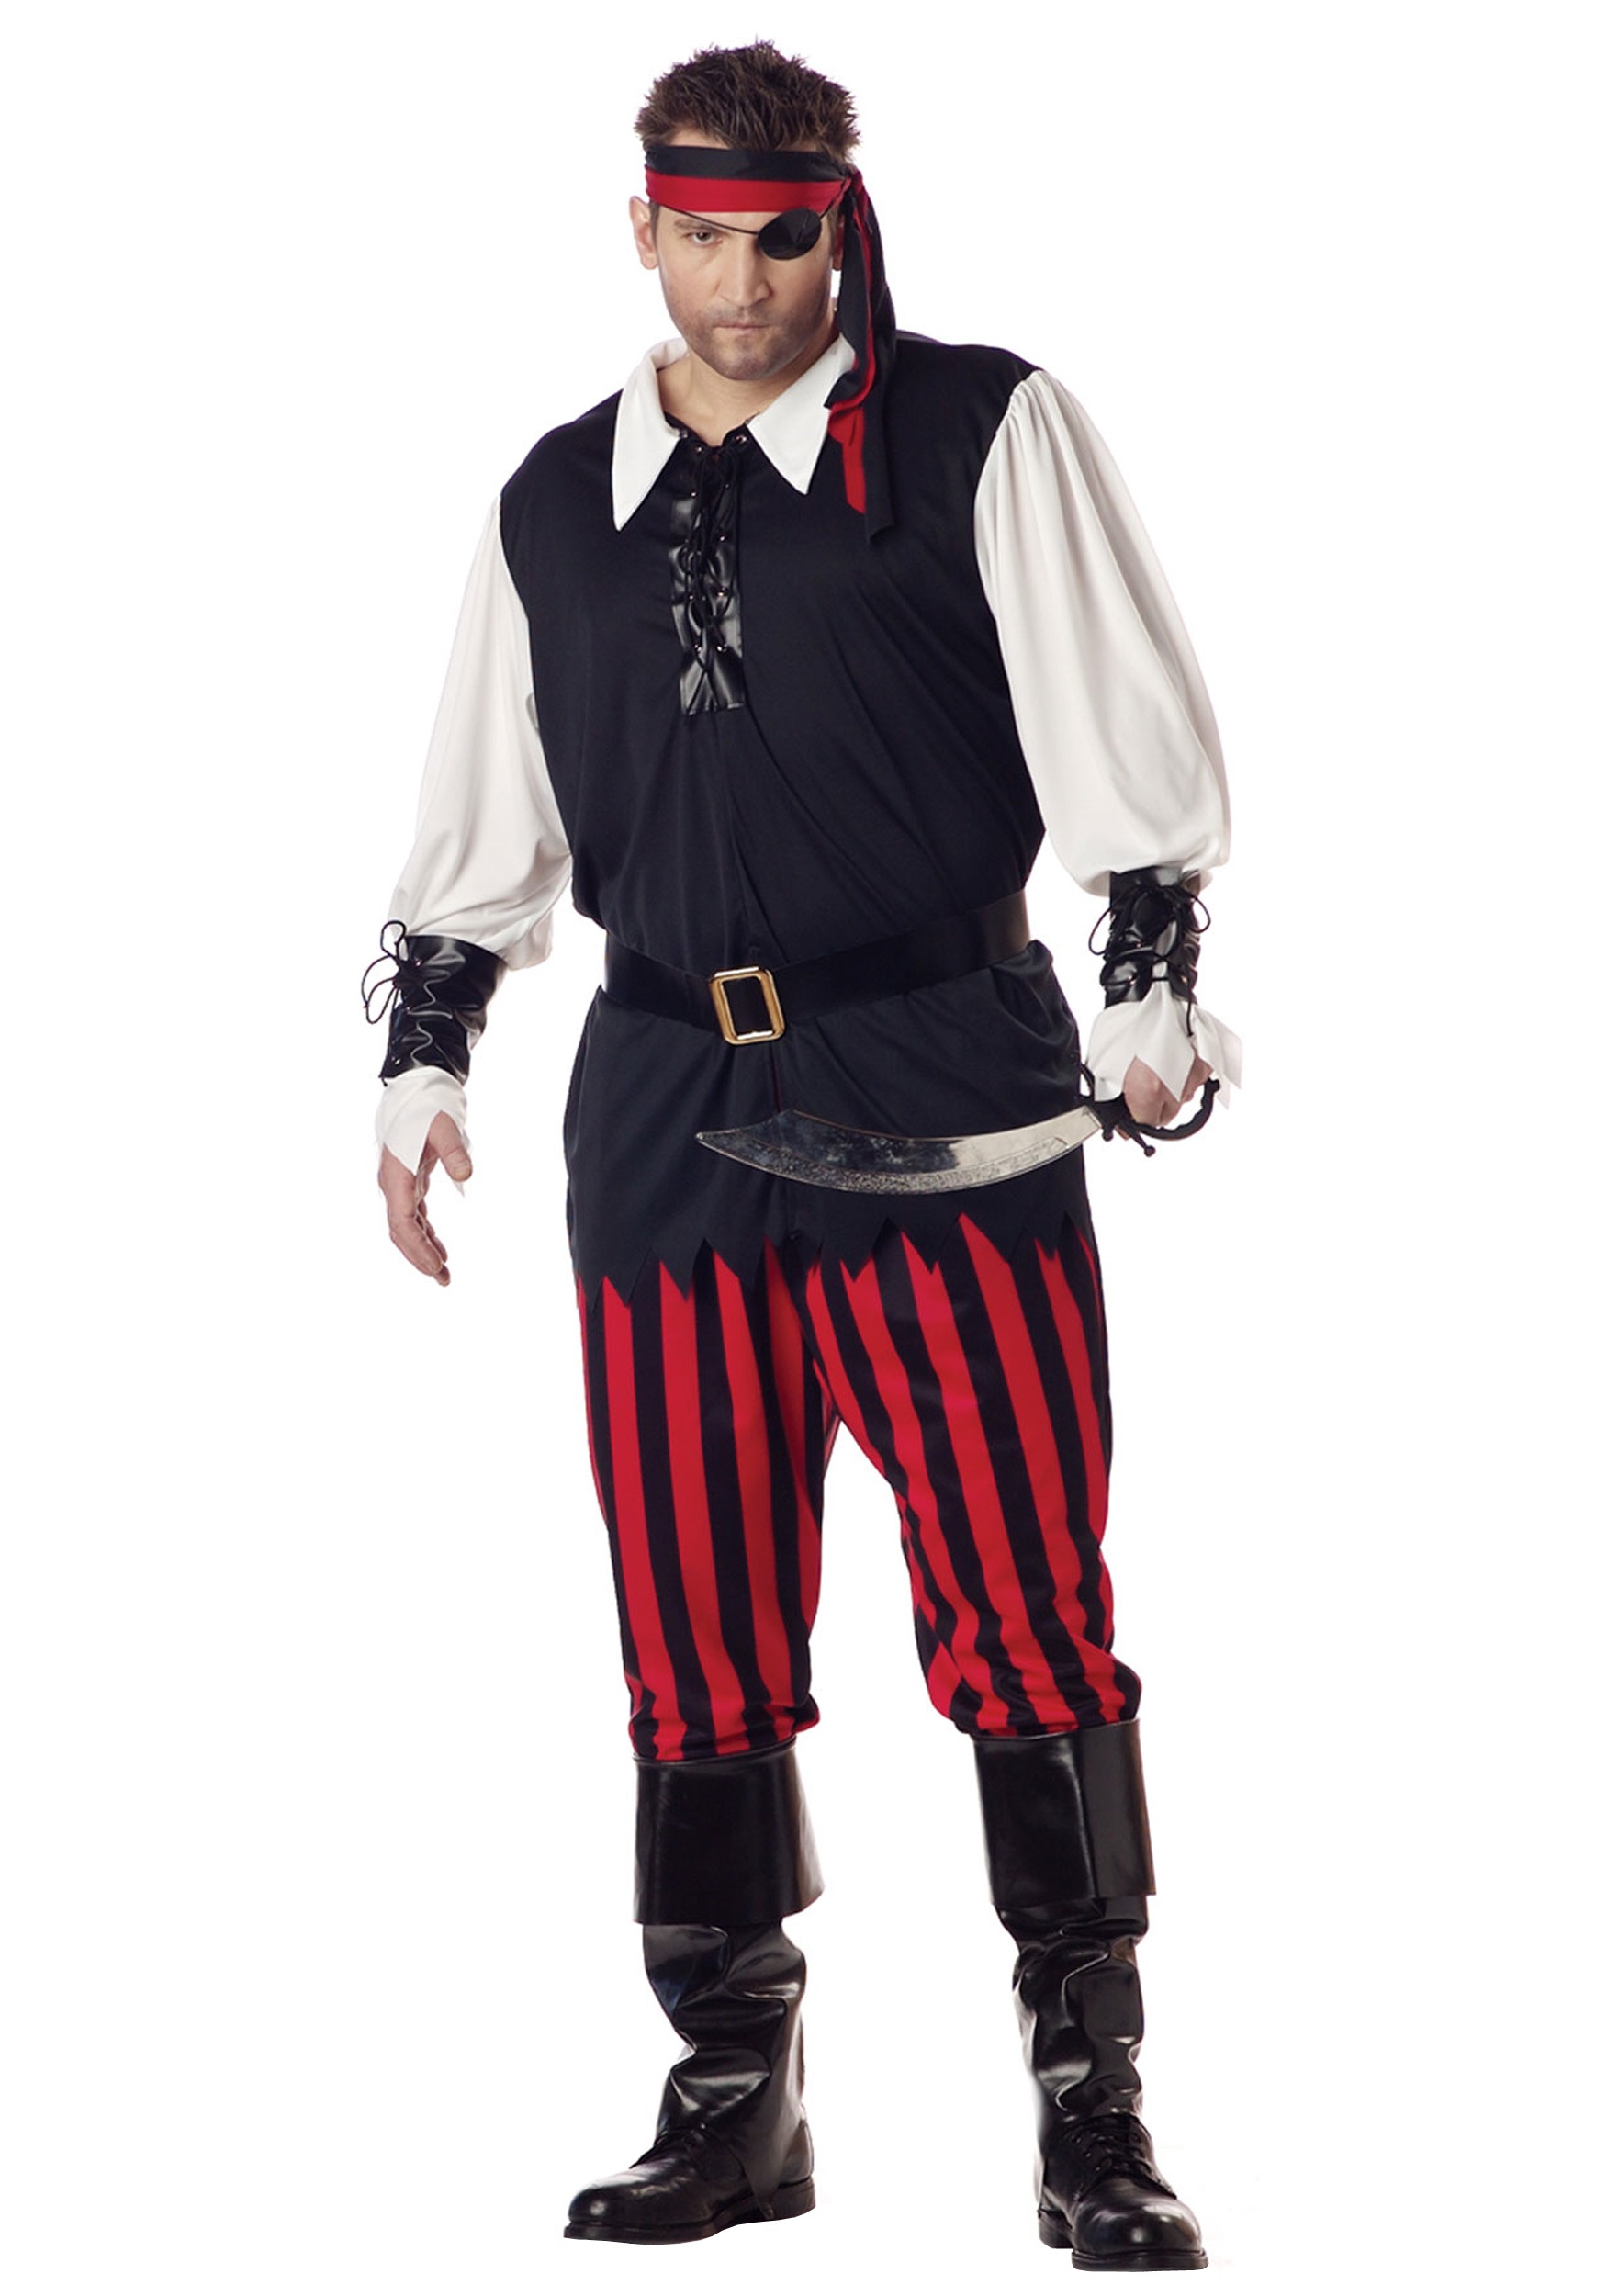 Photos - Fancy Dress California Costume Collection Plus Size Men's Cutthroat Pirate Costume | A 